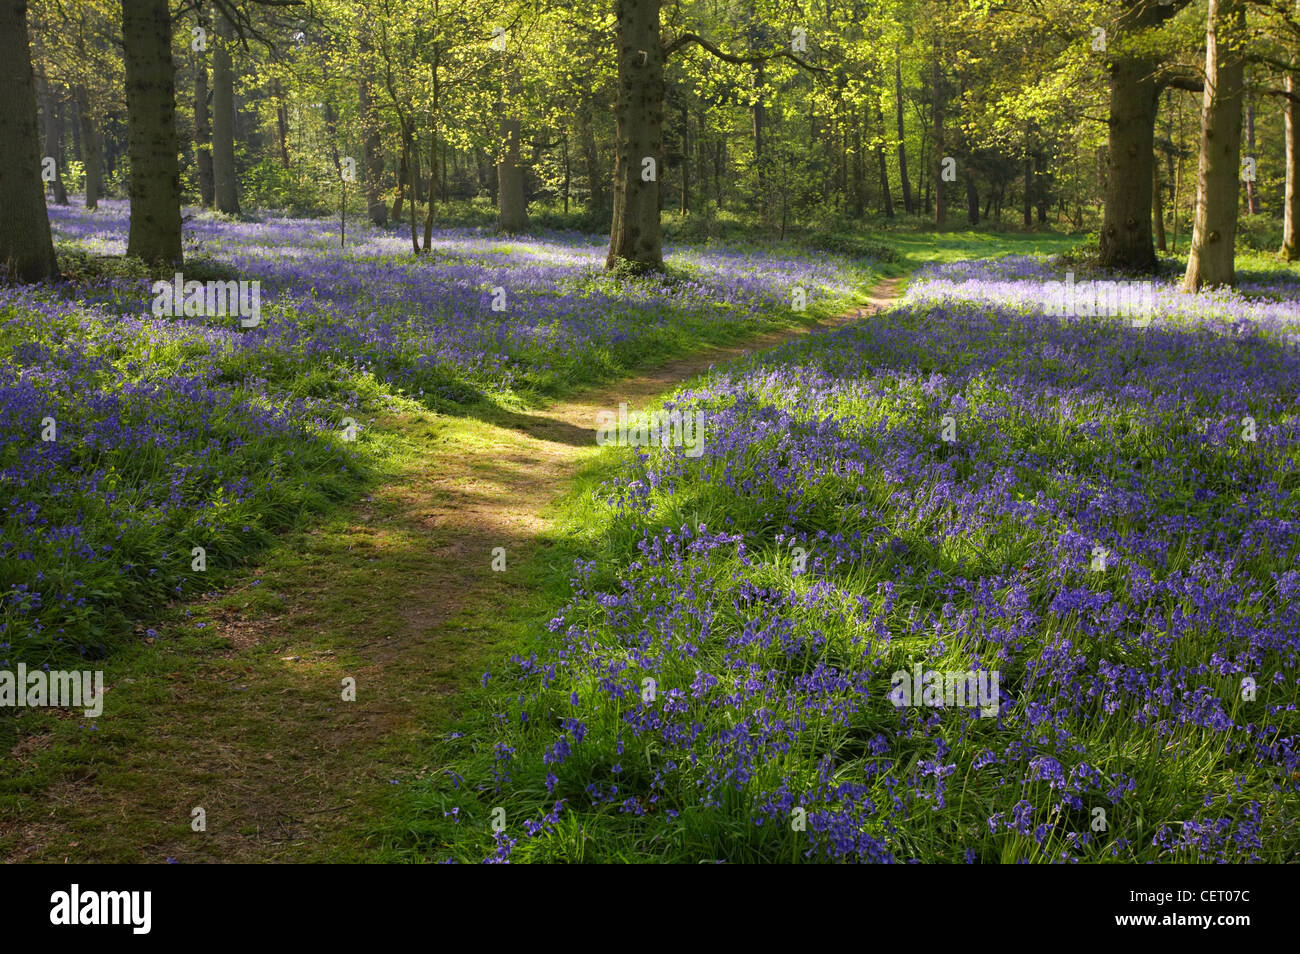 A bluebell wood At Blickling in Norfolk. Stock Photo